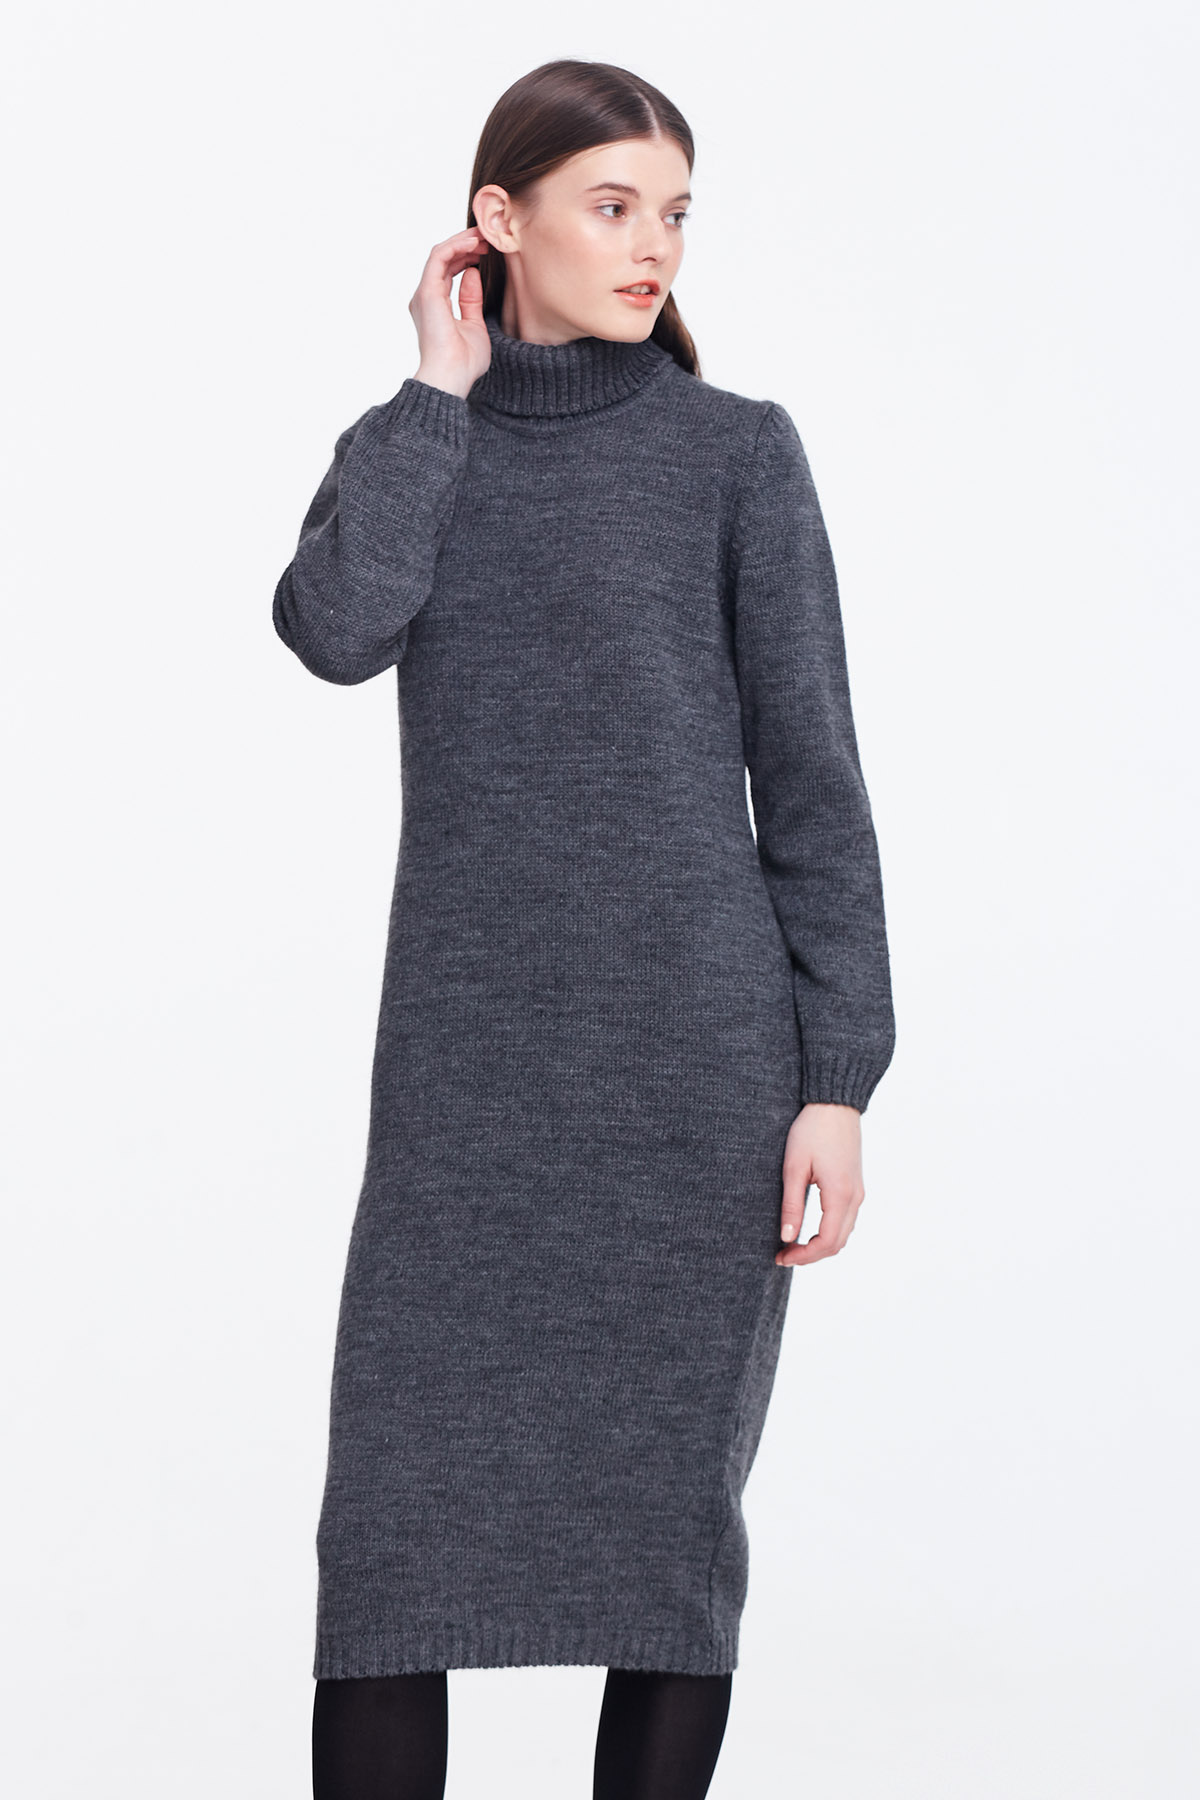 Grey knit dress with a stand up collar, photo 1